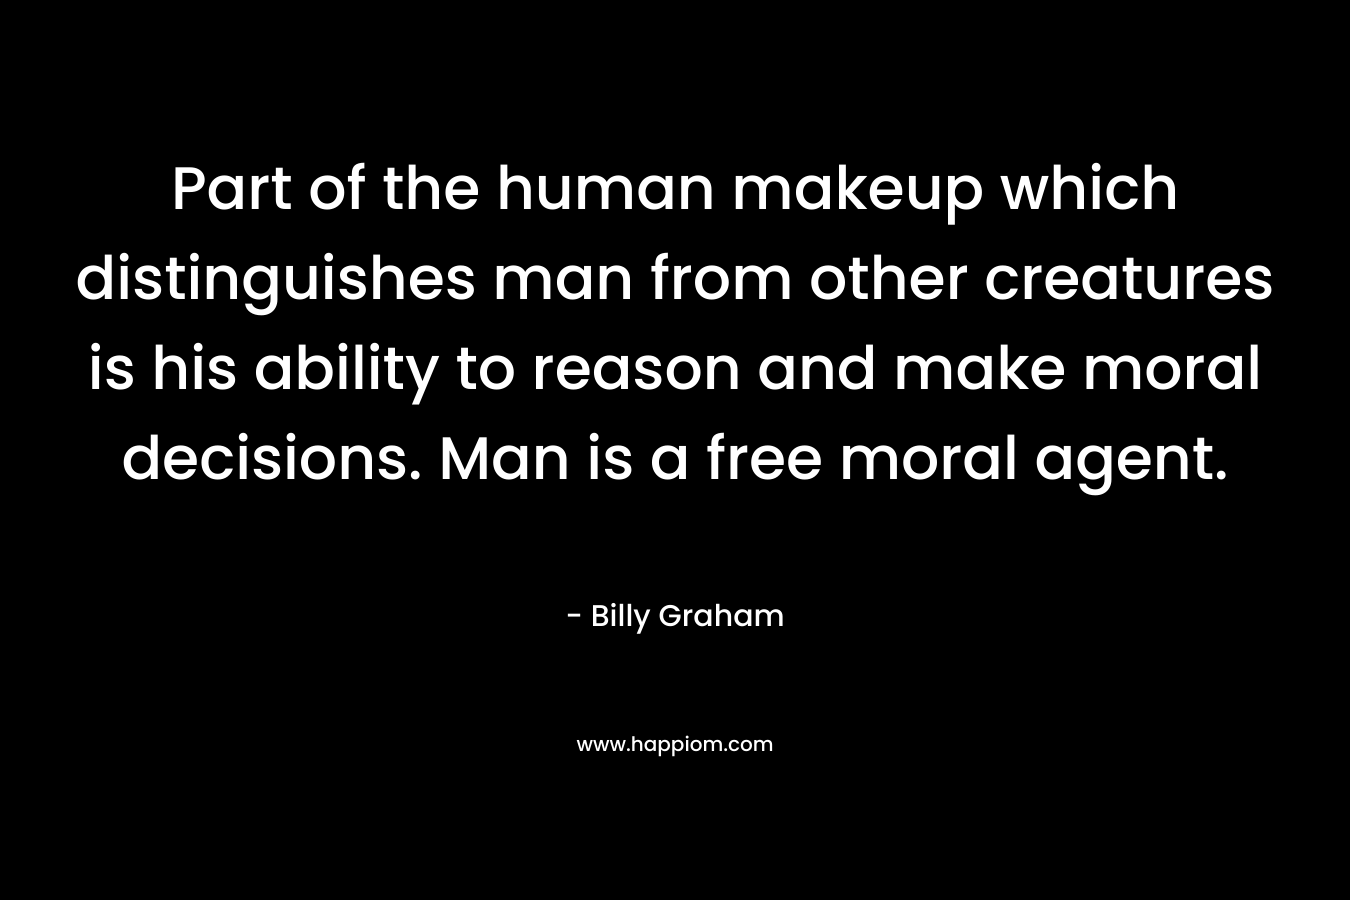 Part of the human makeup which distinguishes man from other creatures is his ability to reason and make moral decisions. Man is a free moral agent. – Billy Graham